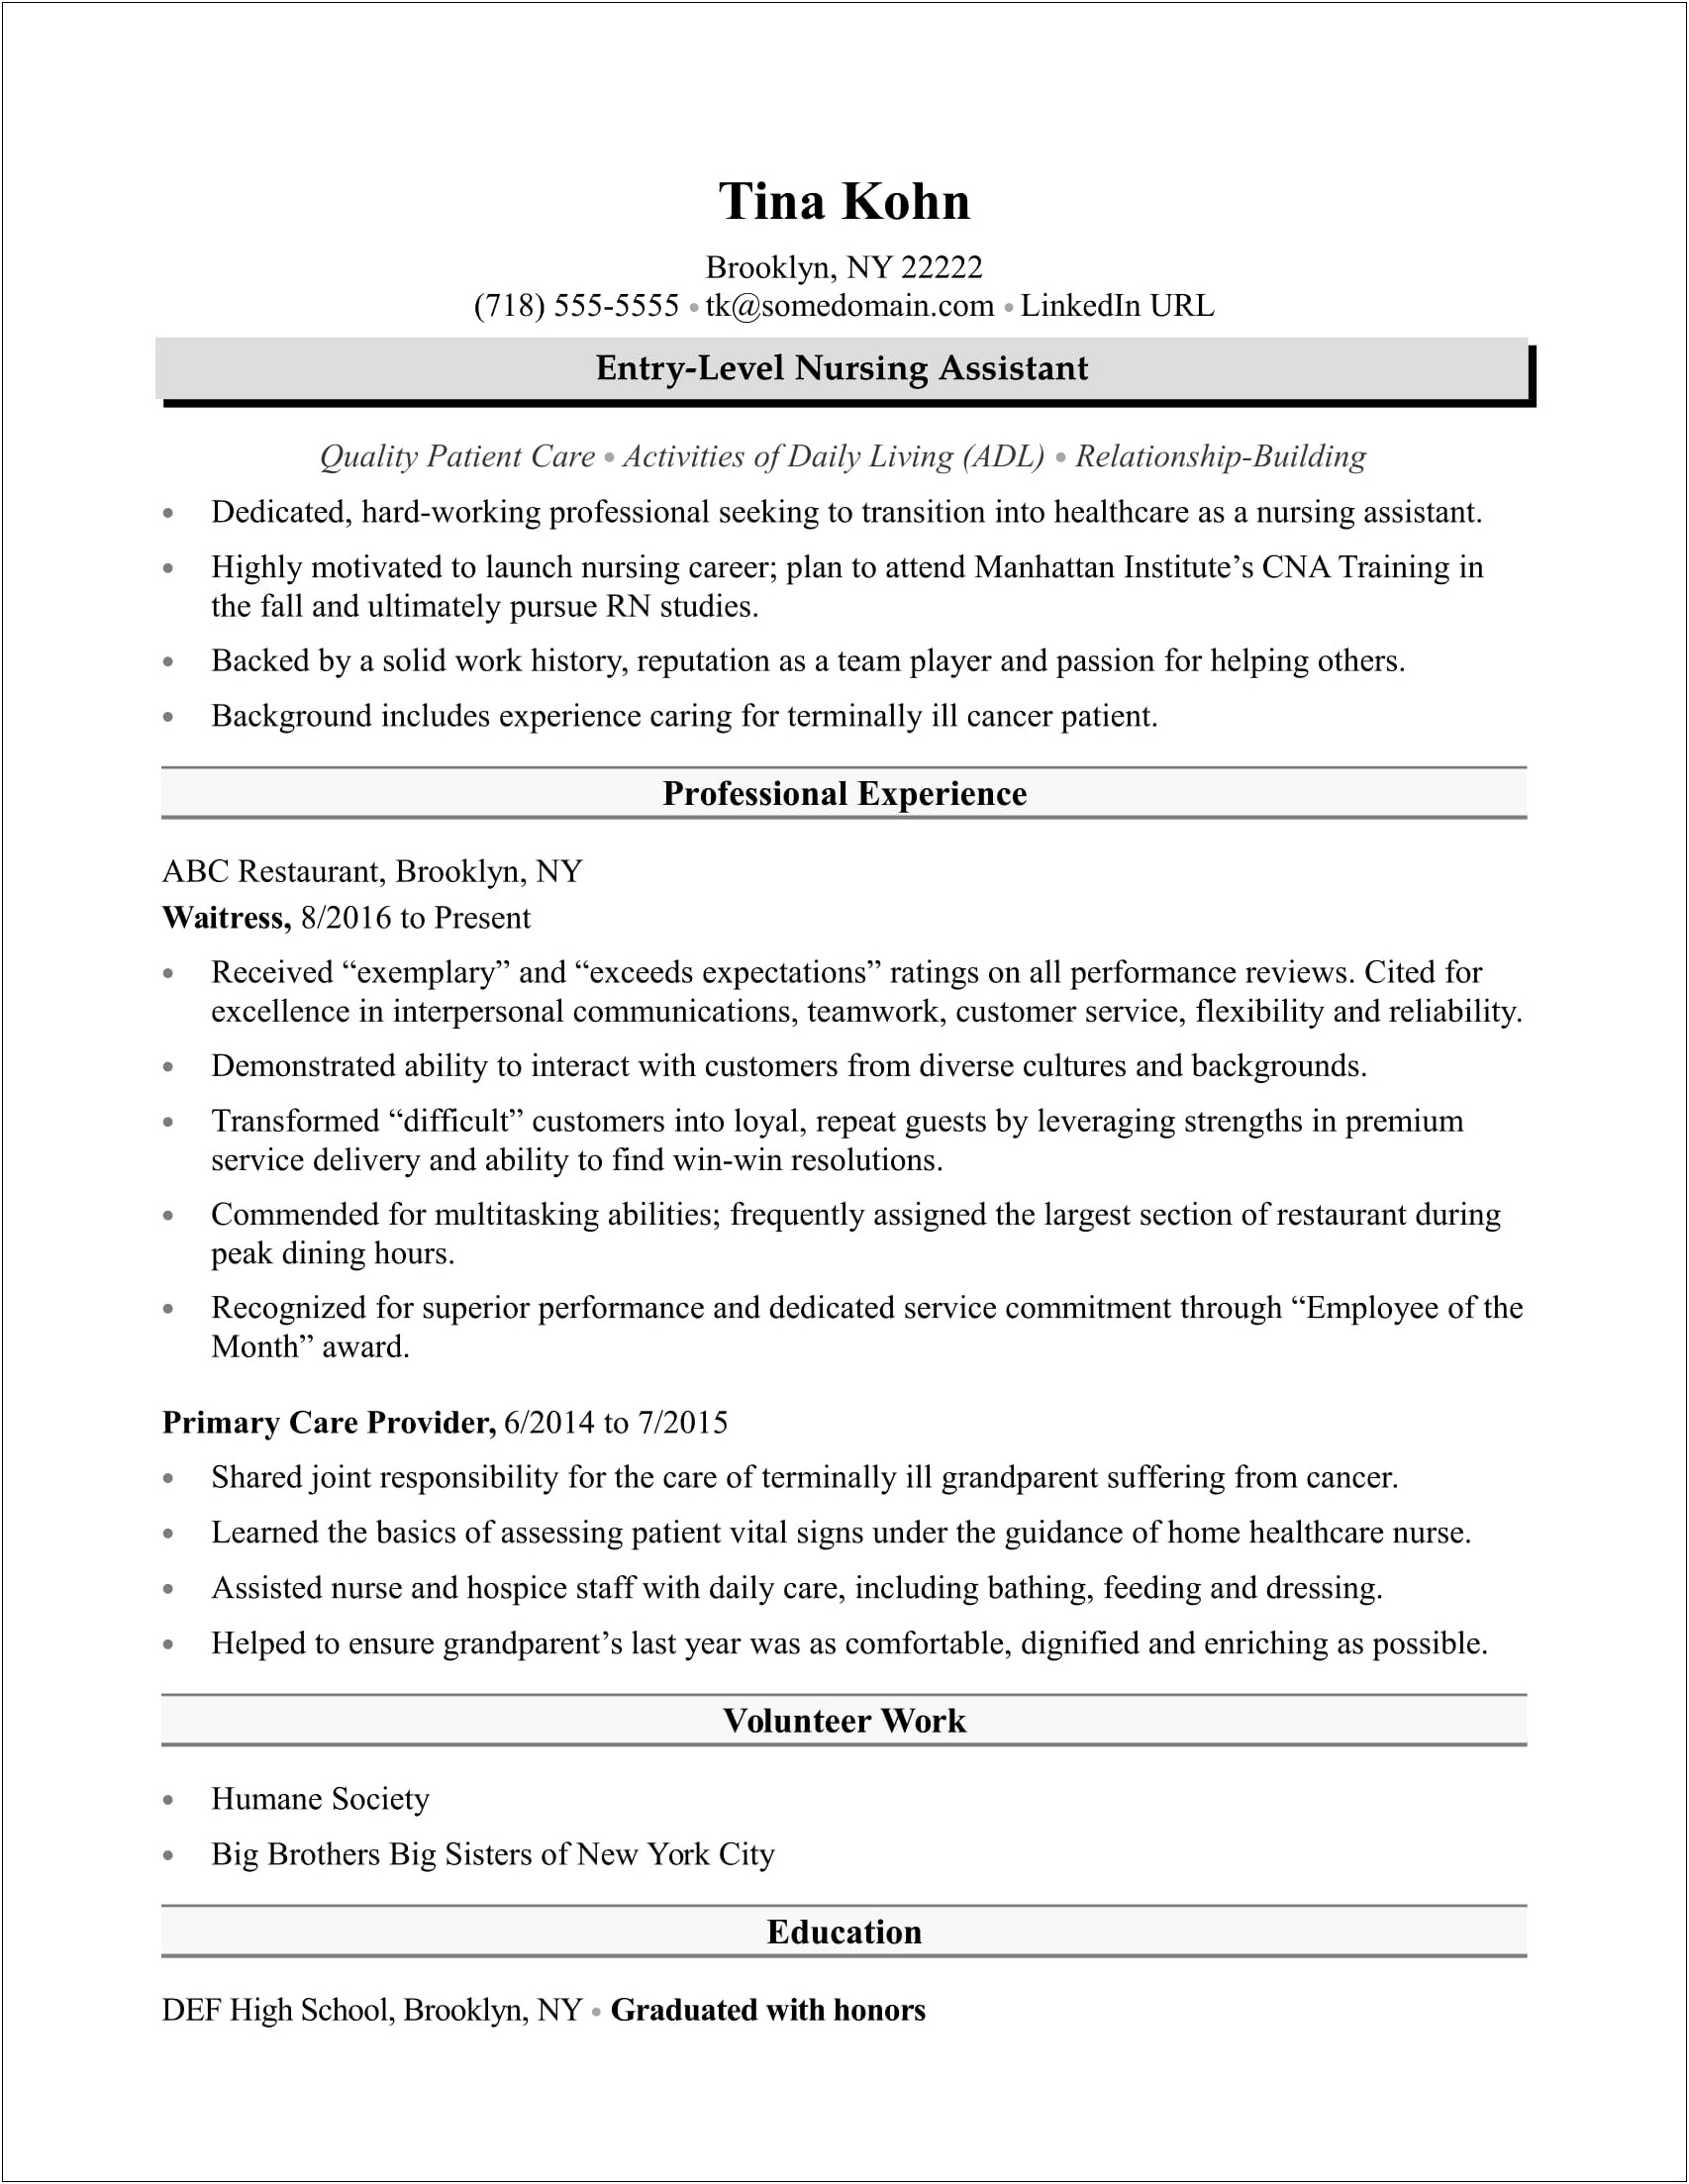 Resume Objective For Healthcare Assistant